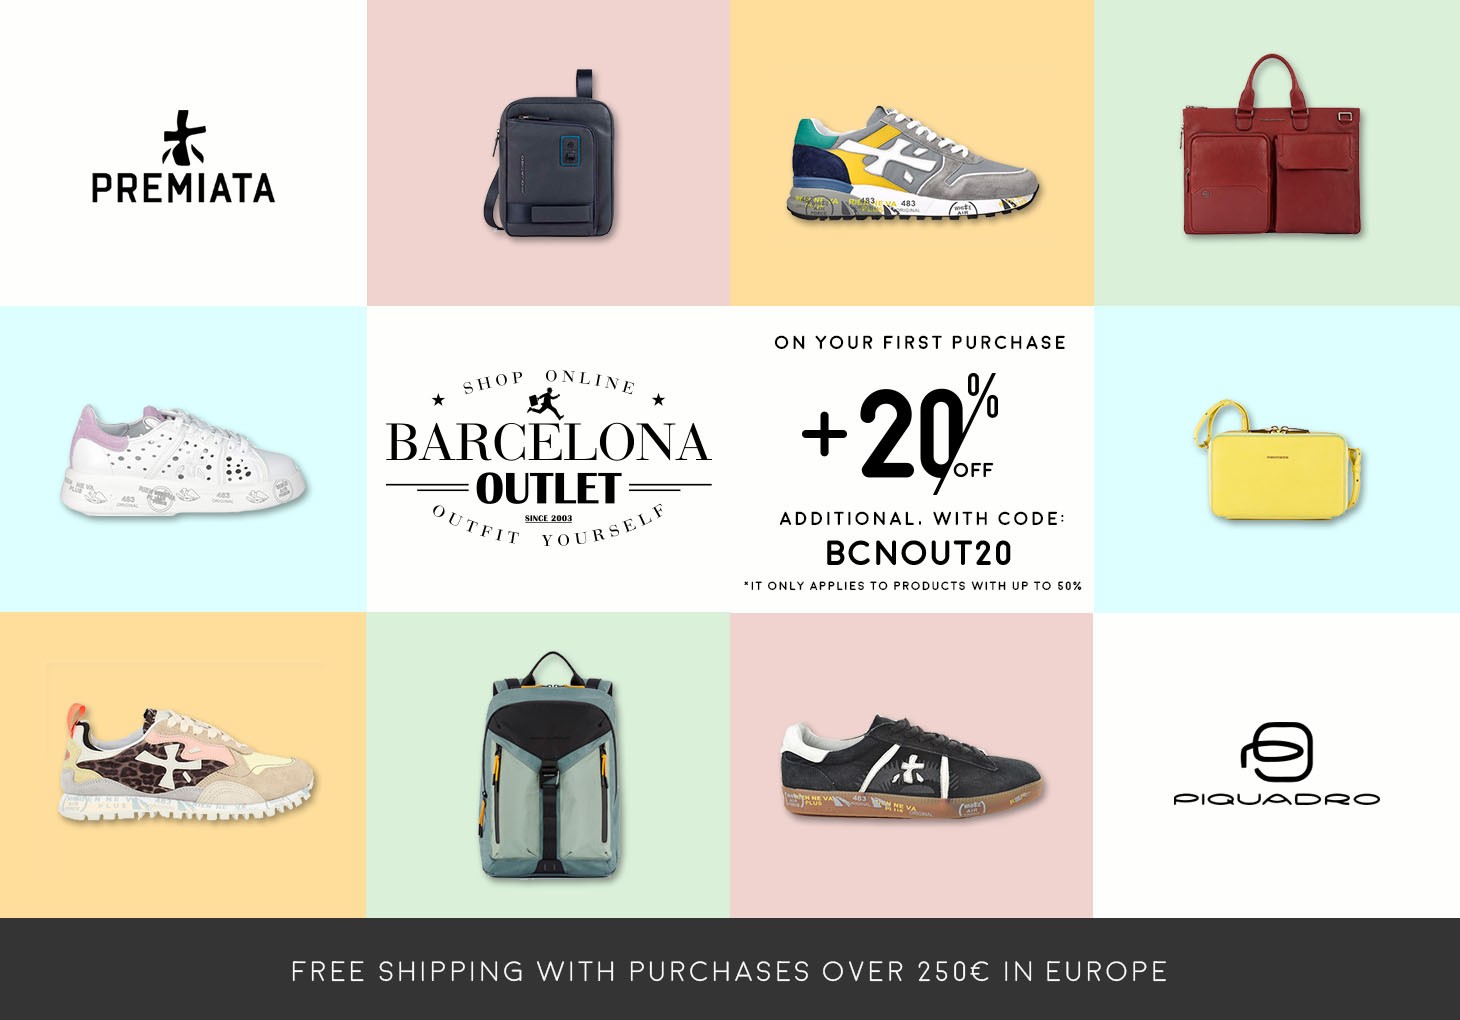 Barcelona Outlet - 20% on your first purchase